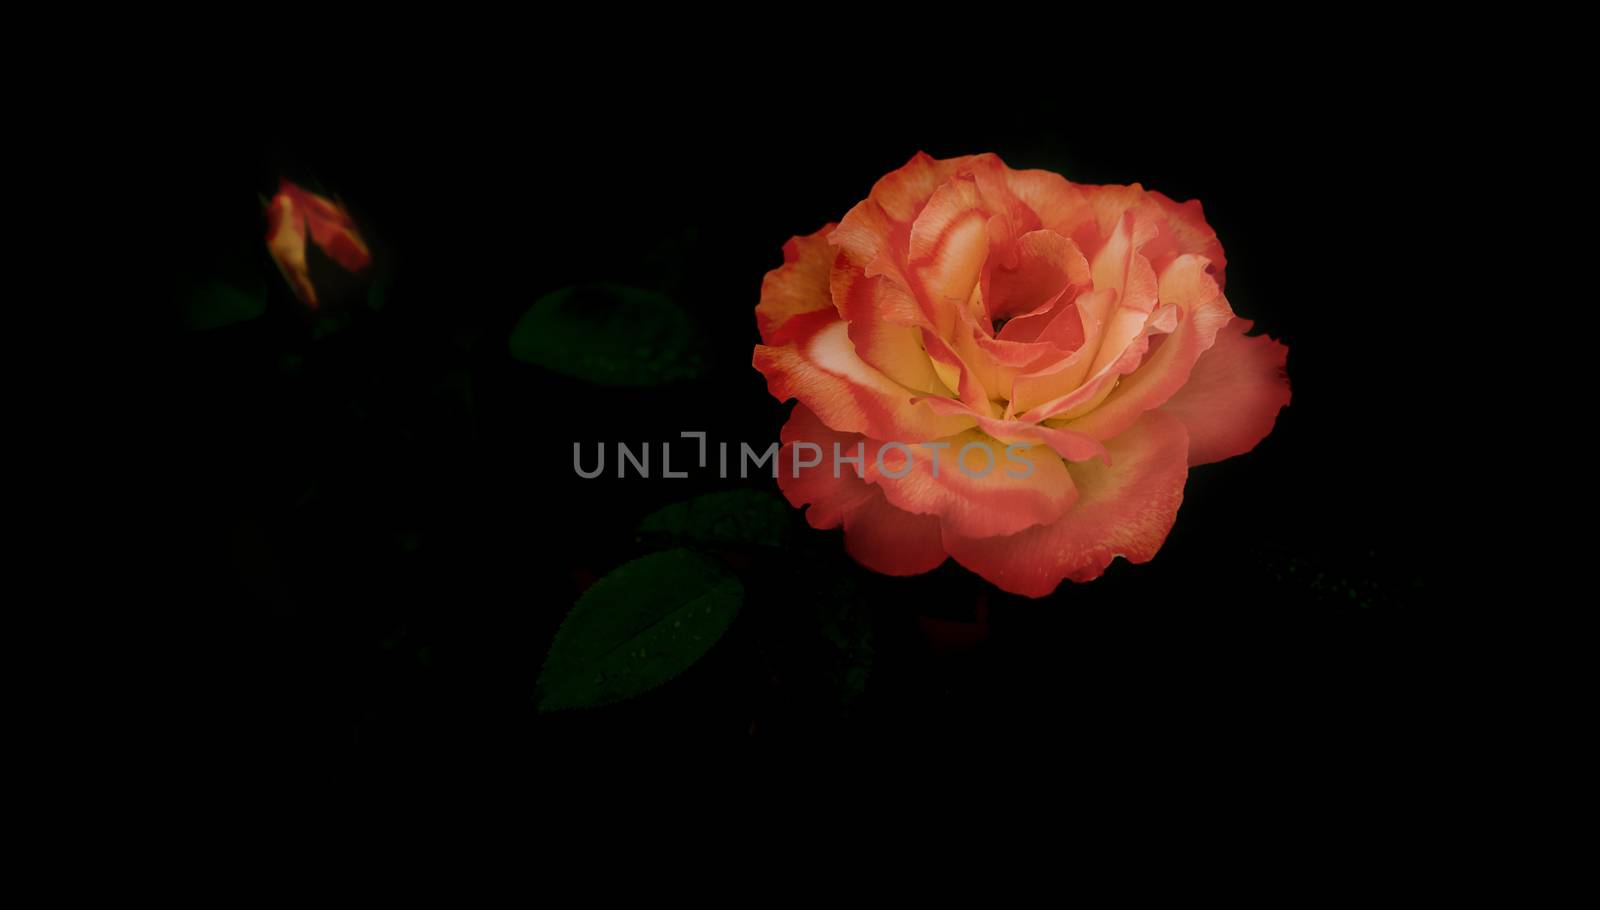 panorama of beautiful Rose flower symbol of love on dark black background with copy space for greeting or condolences card